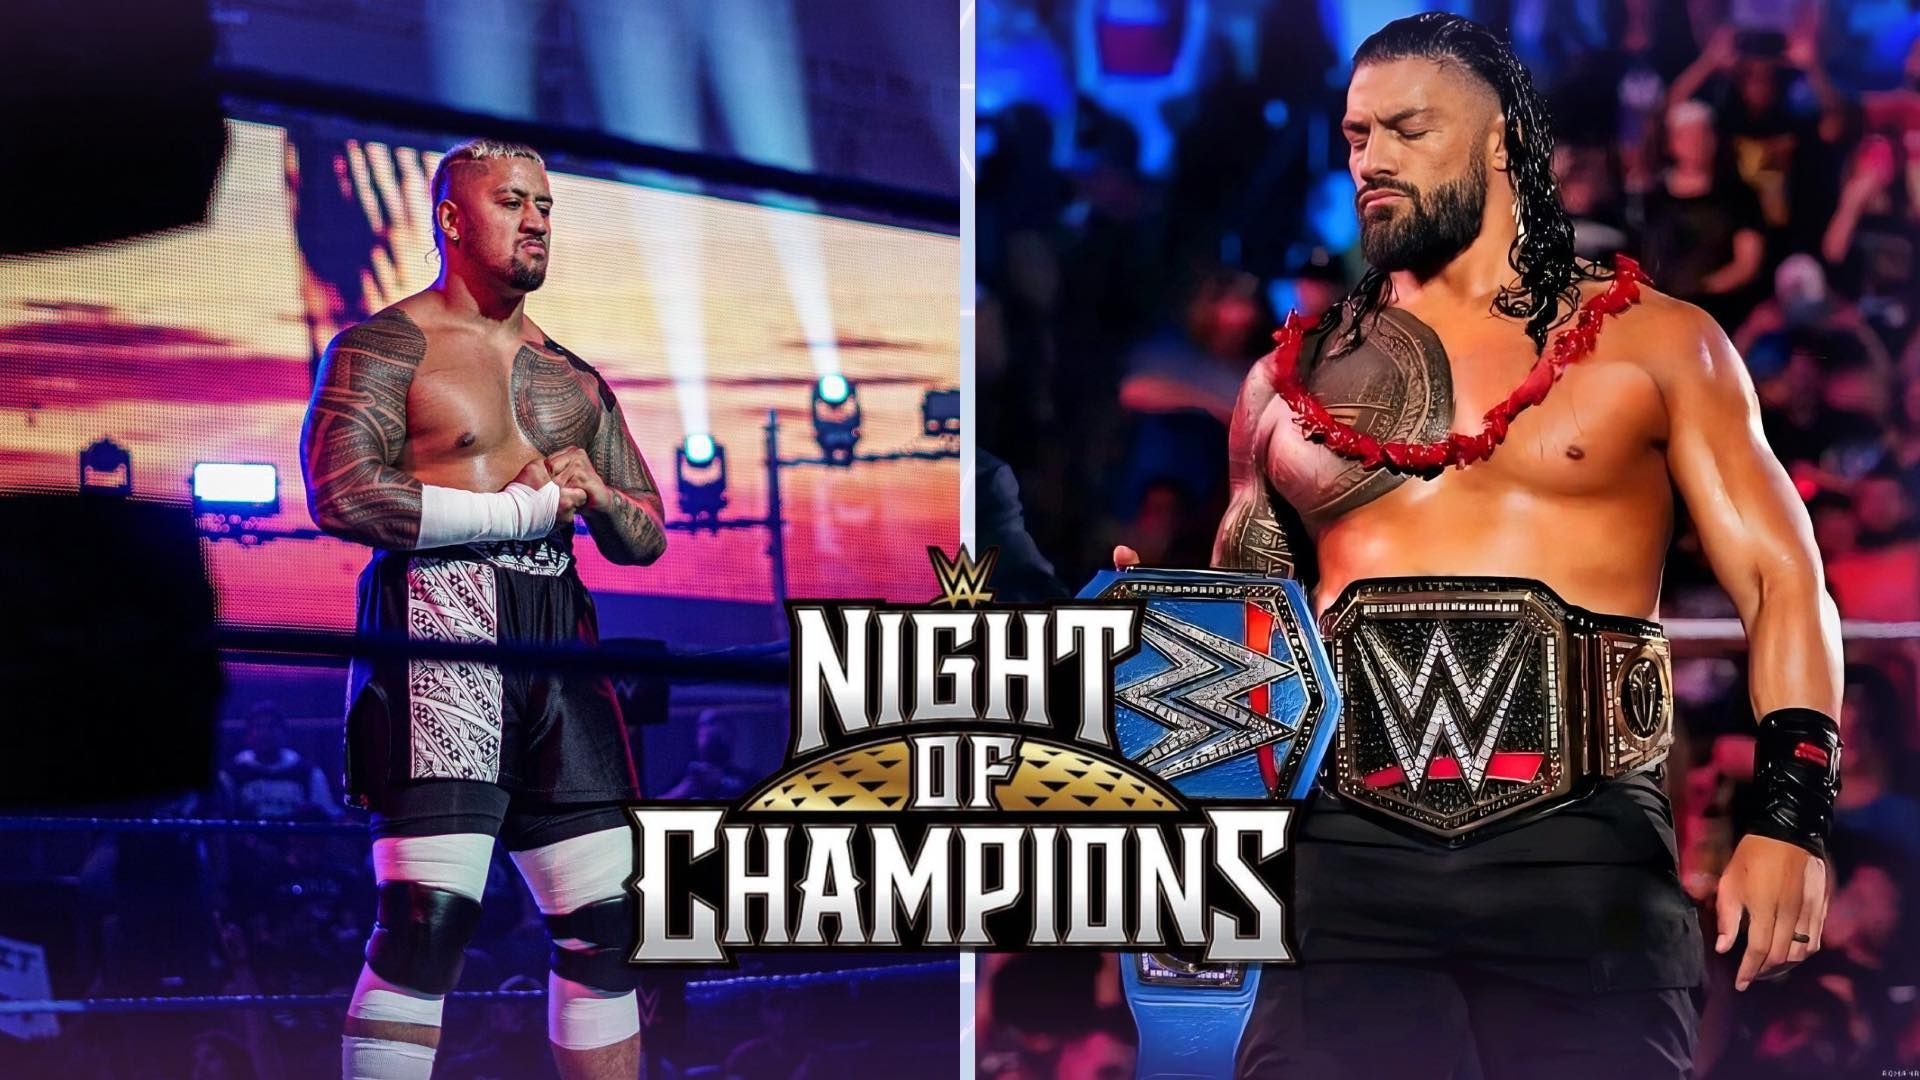 Roman Reigns and Solo Sikoa may lose at WWE Night of Champions